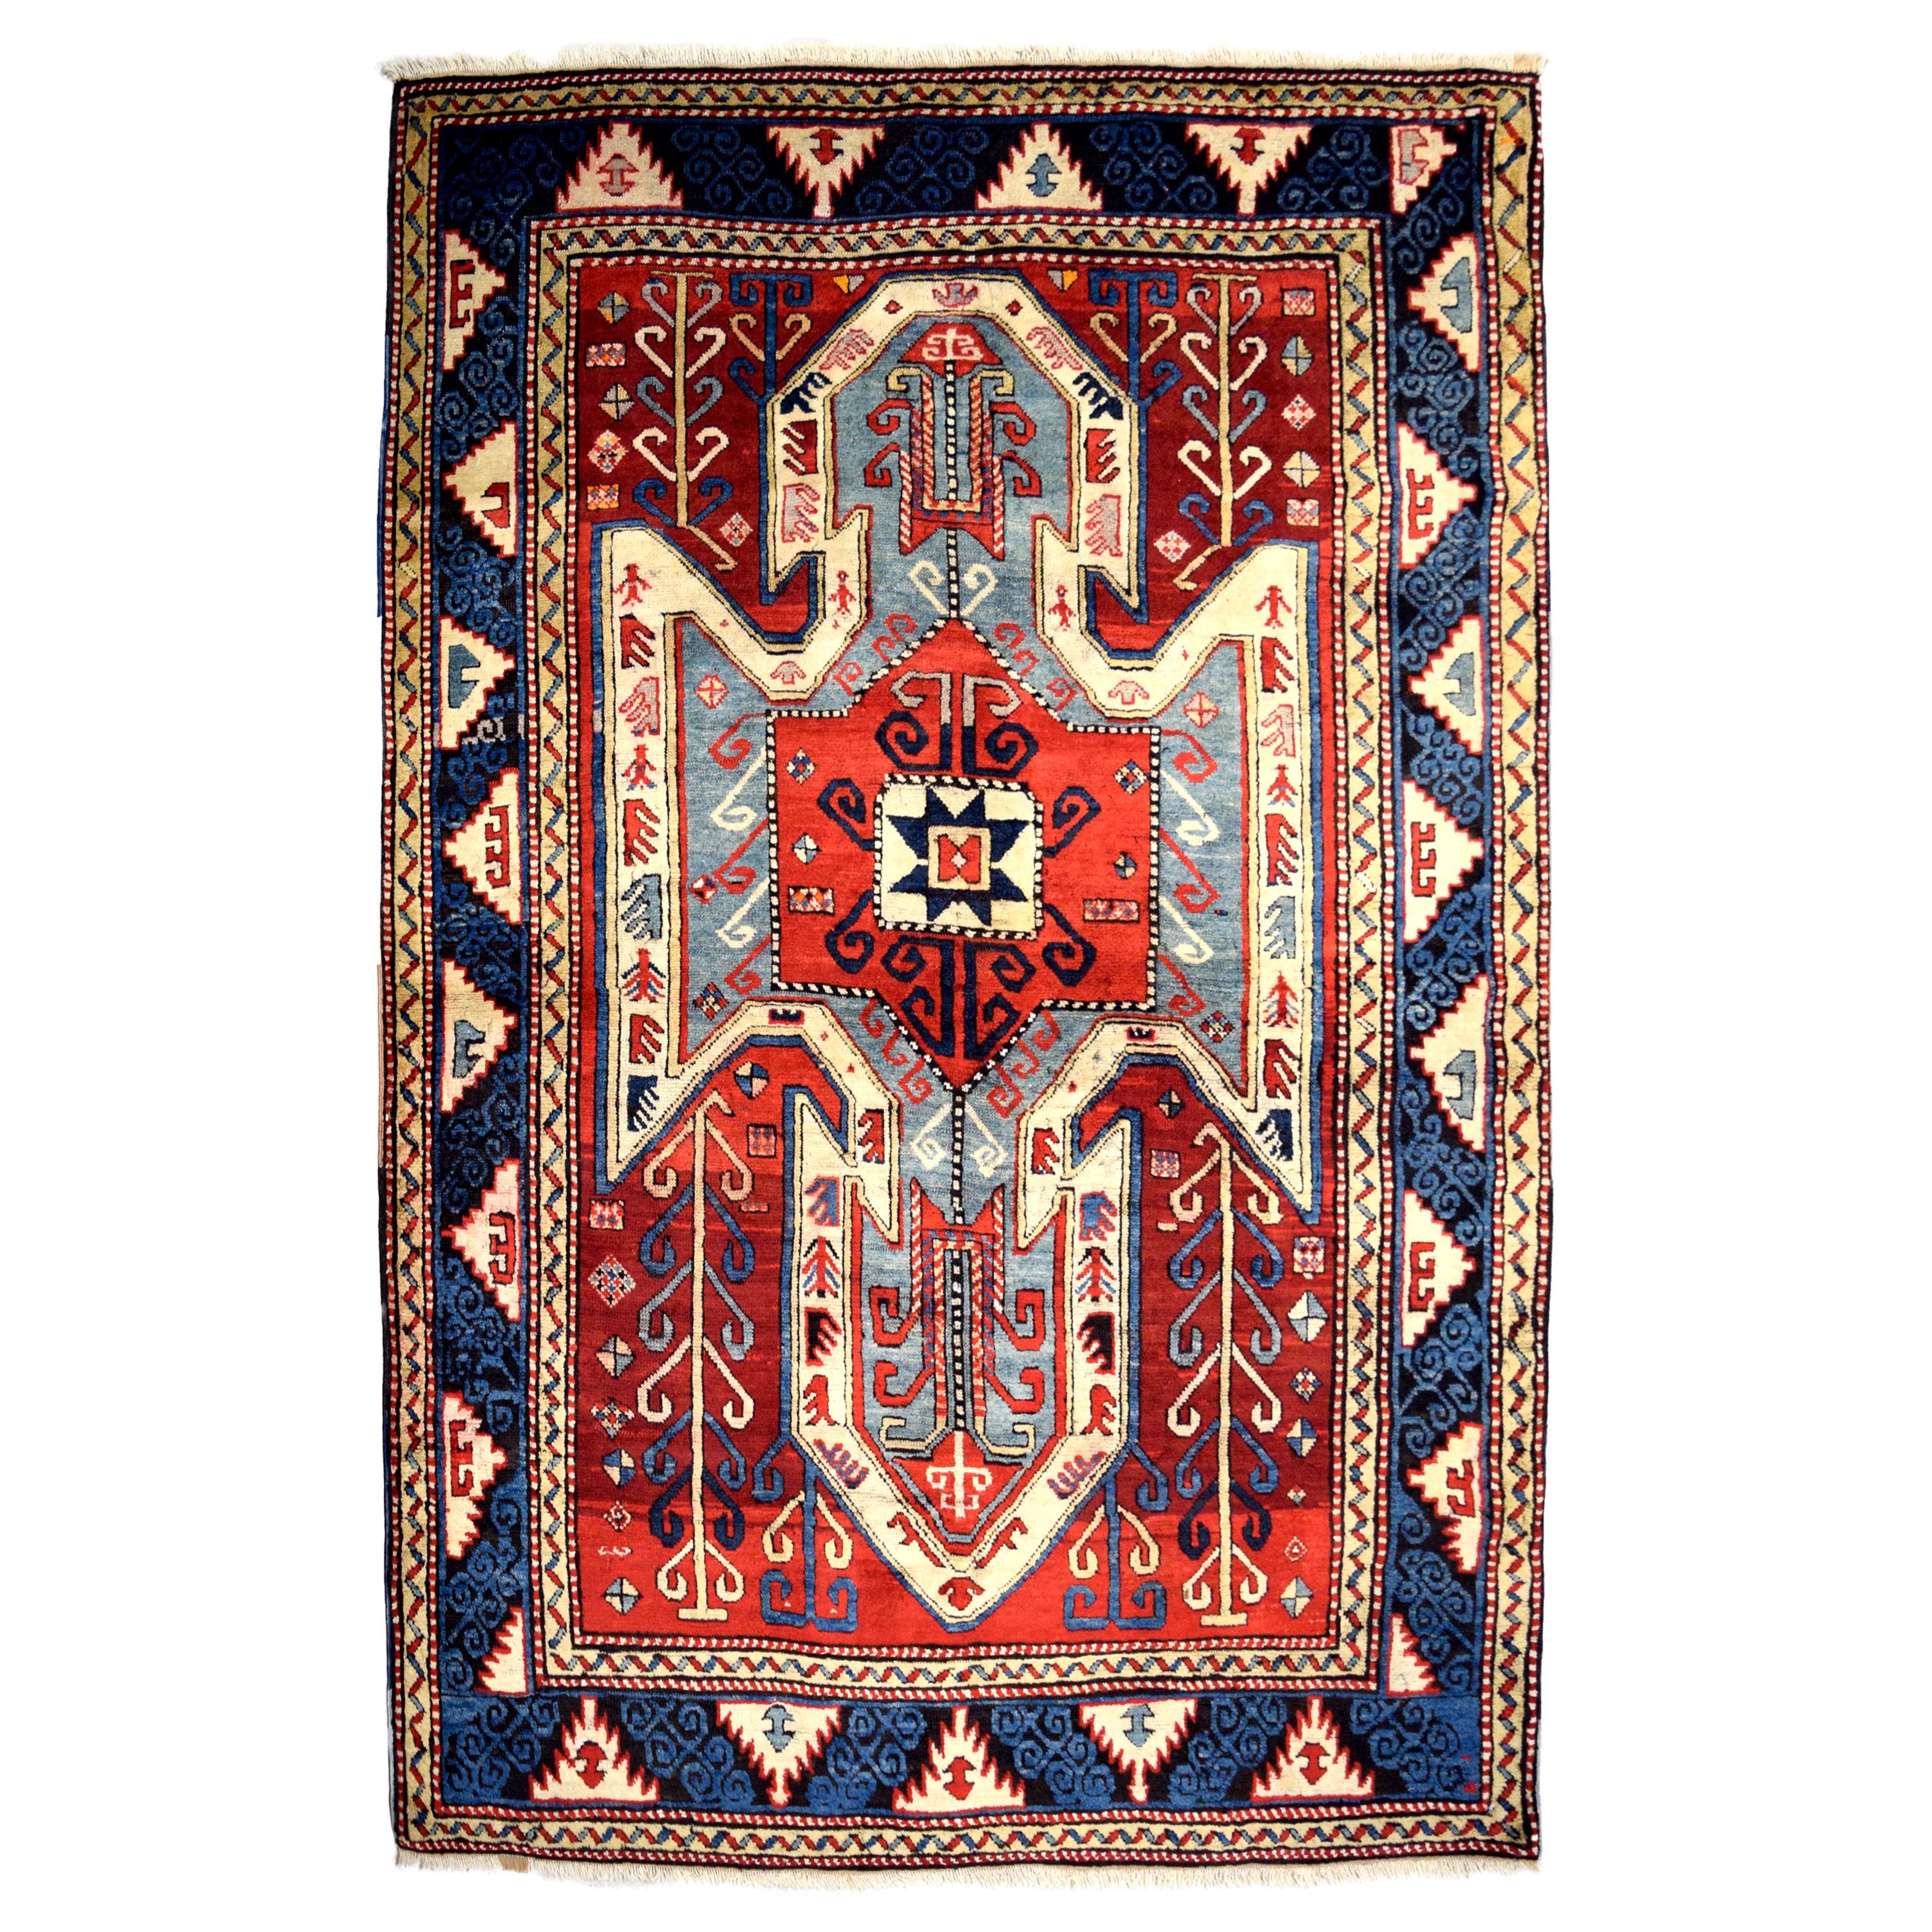 Antique 1880s Caucasian Rug, Red, Blue, and Cream, 5' x 7' For Sale